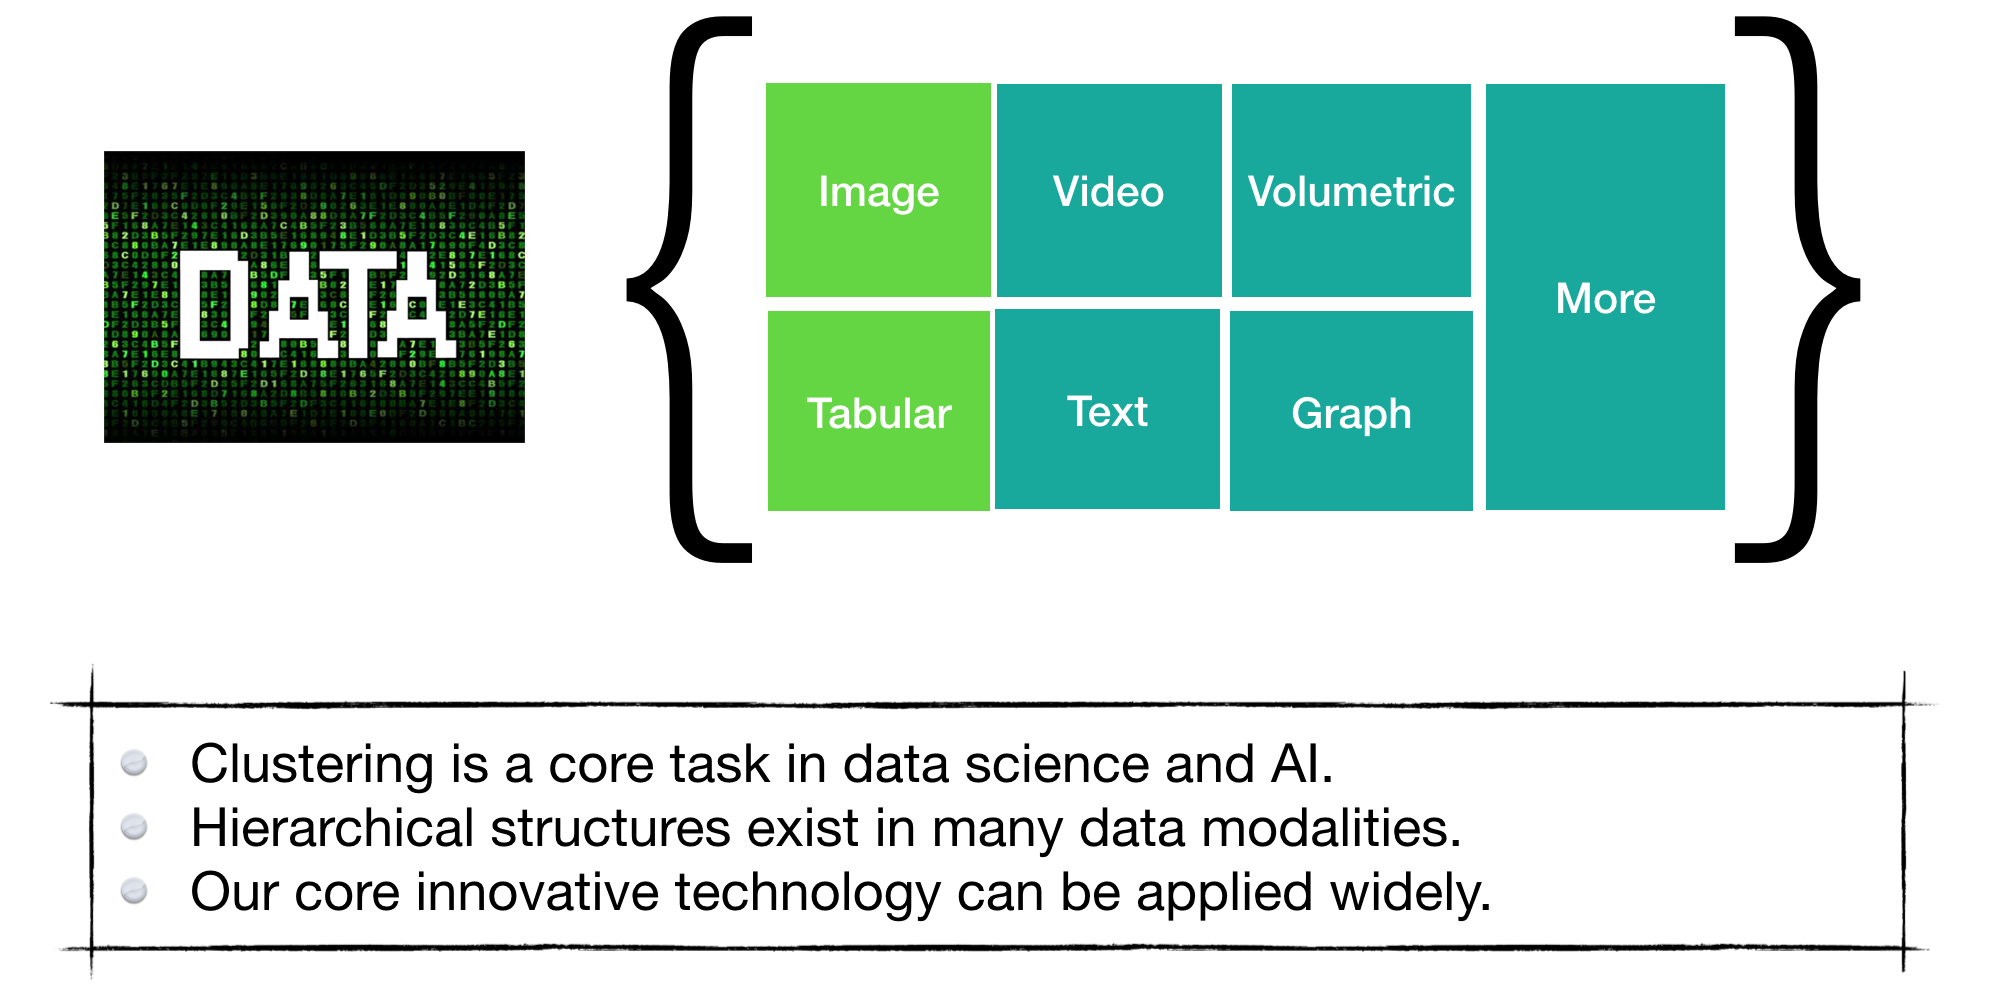 1) Clustering is a core task in data science and AI; 2) Hierarchical structures exist in many data modalities; 3) Our core technology can be applied widely.